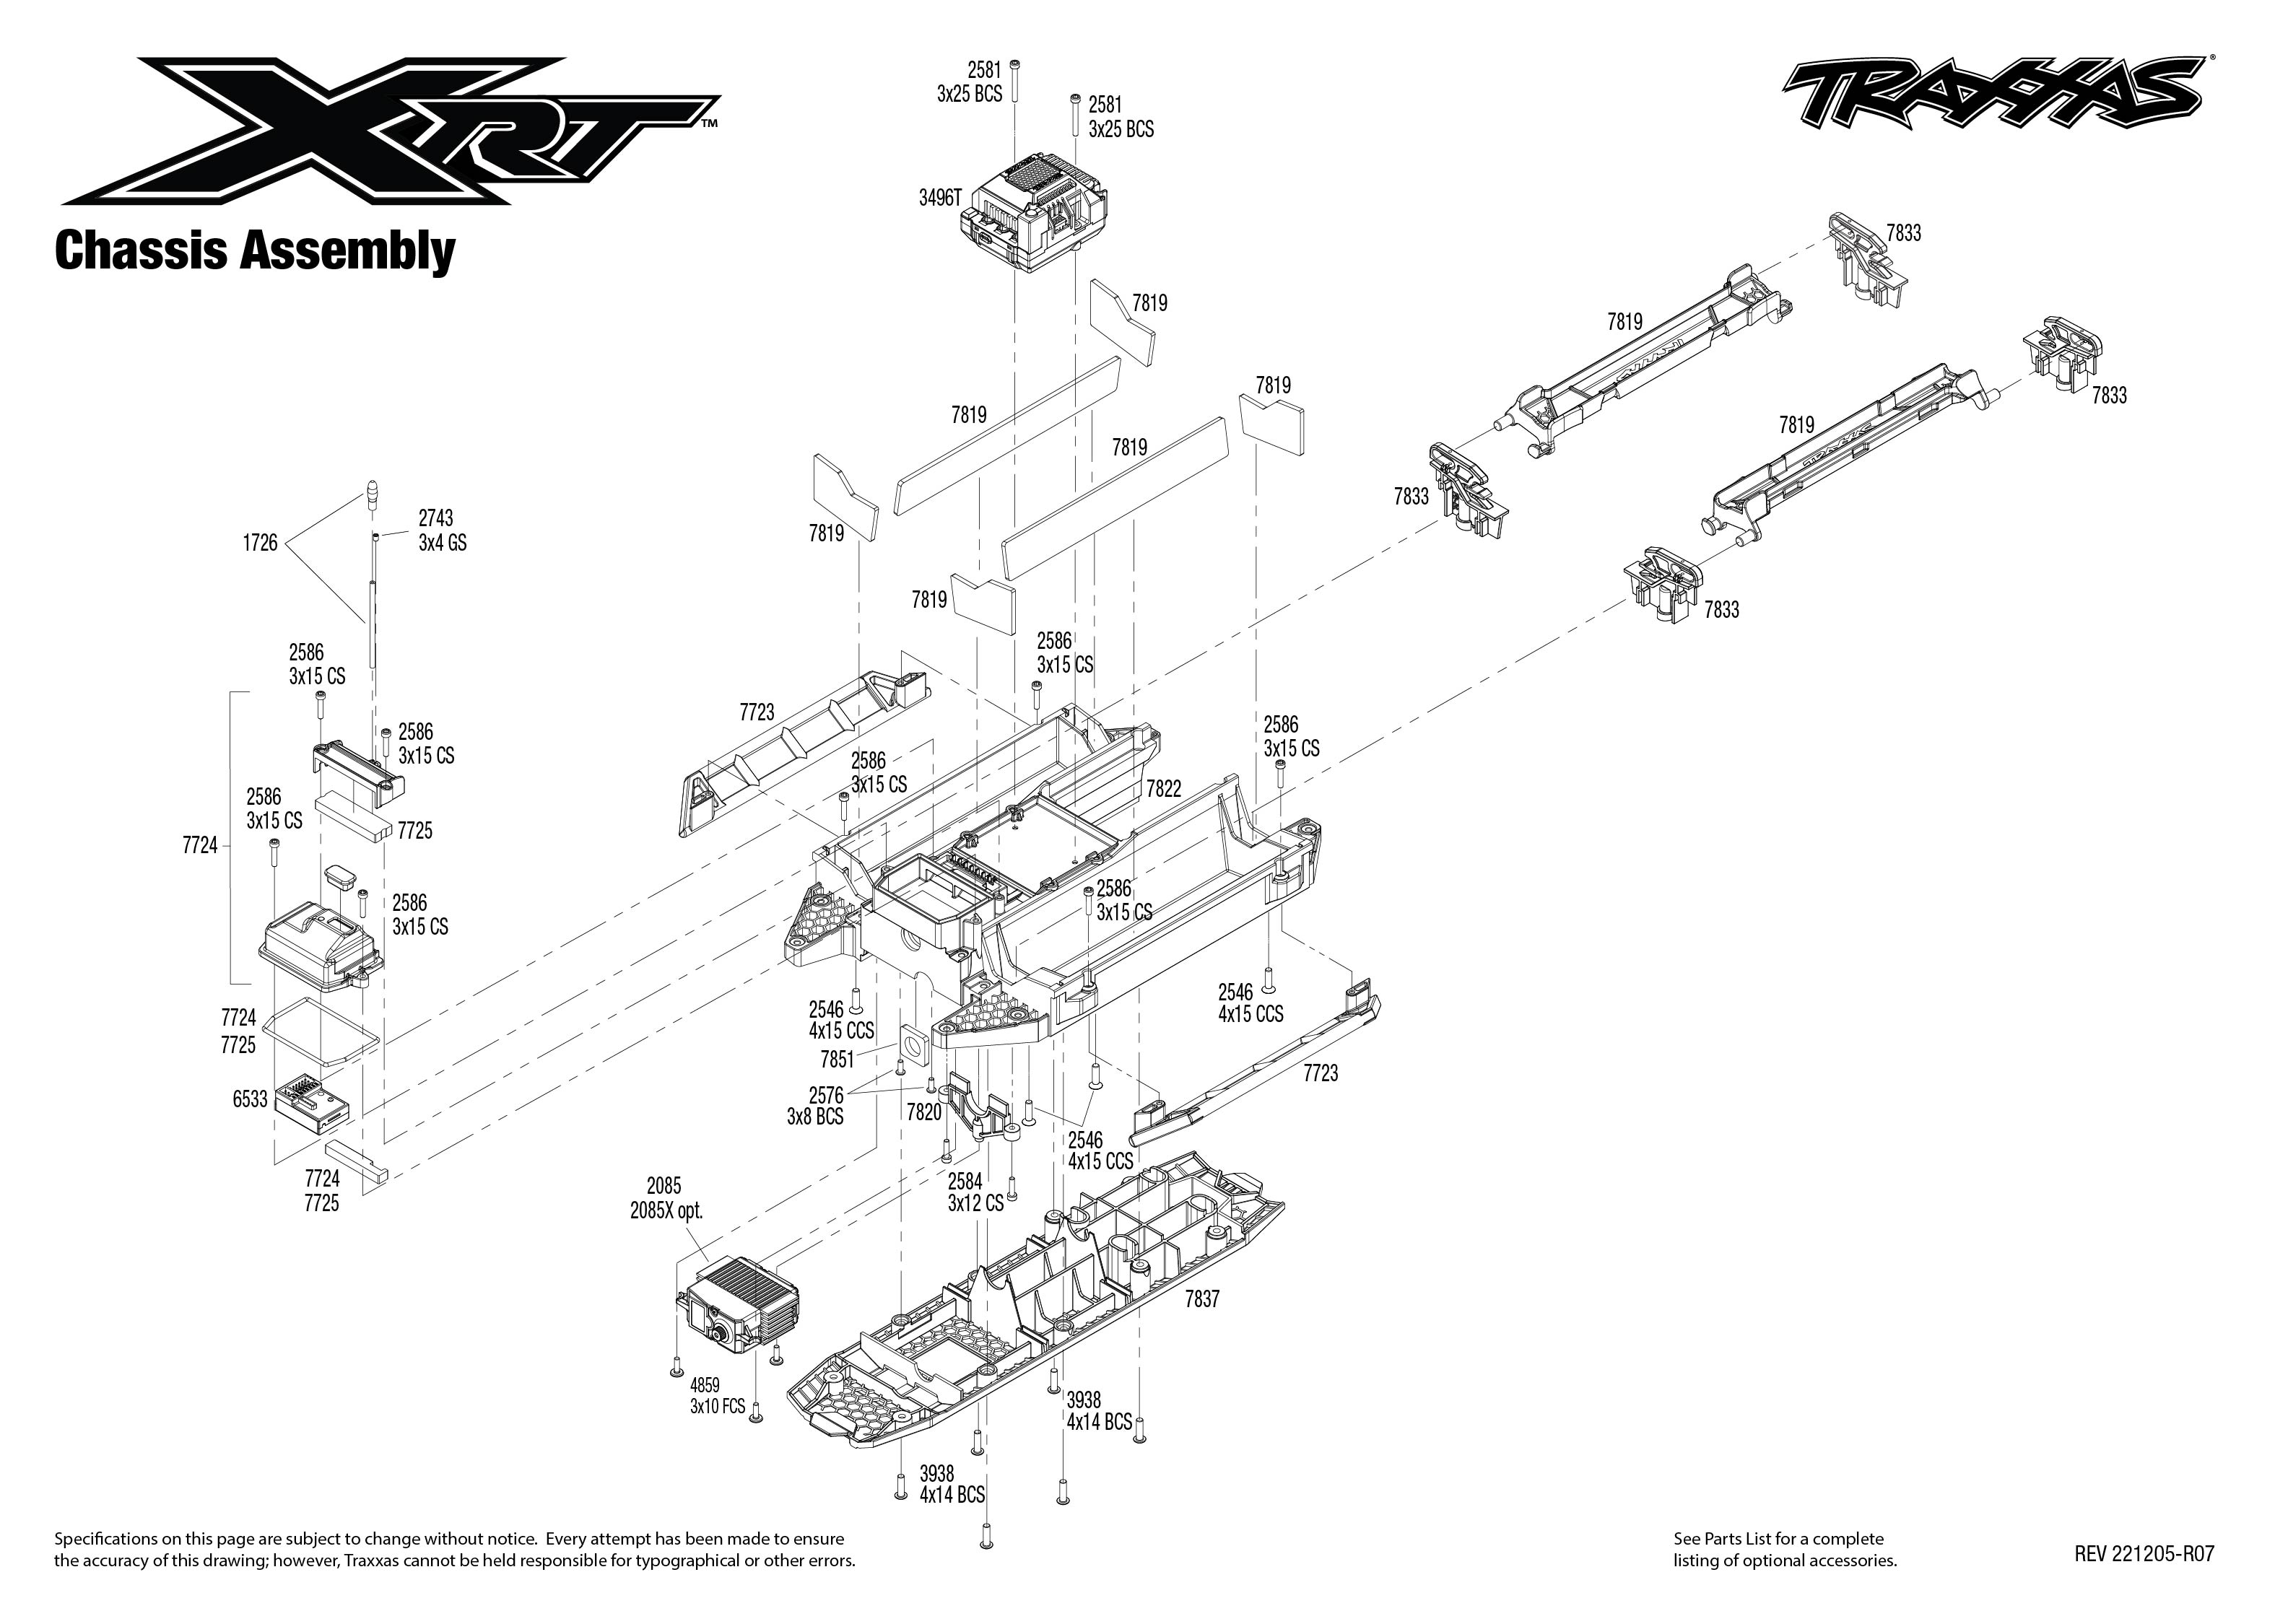 Chassis Assembly Exploded View